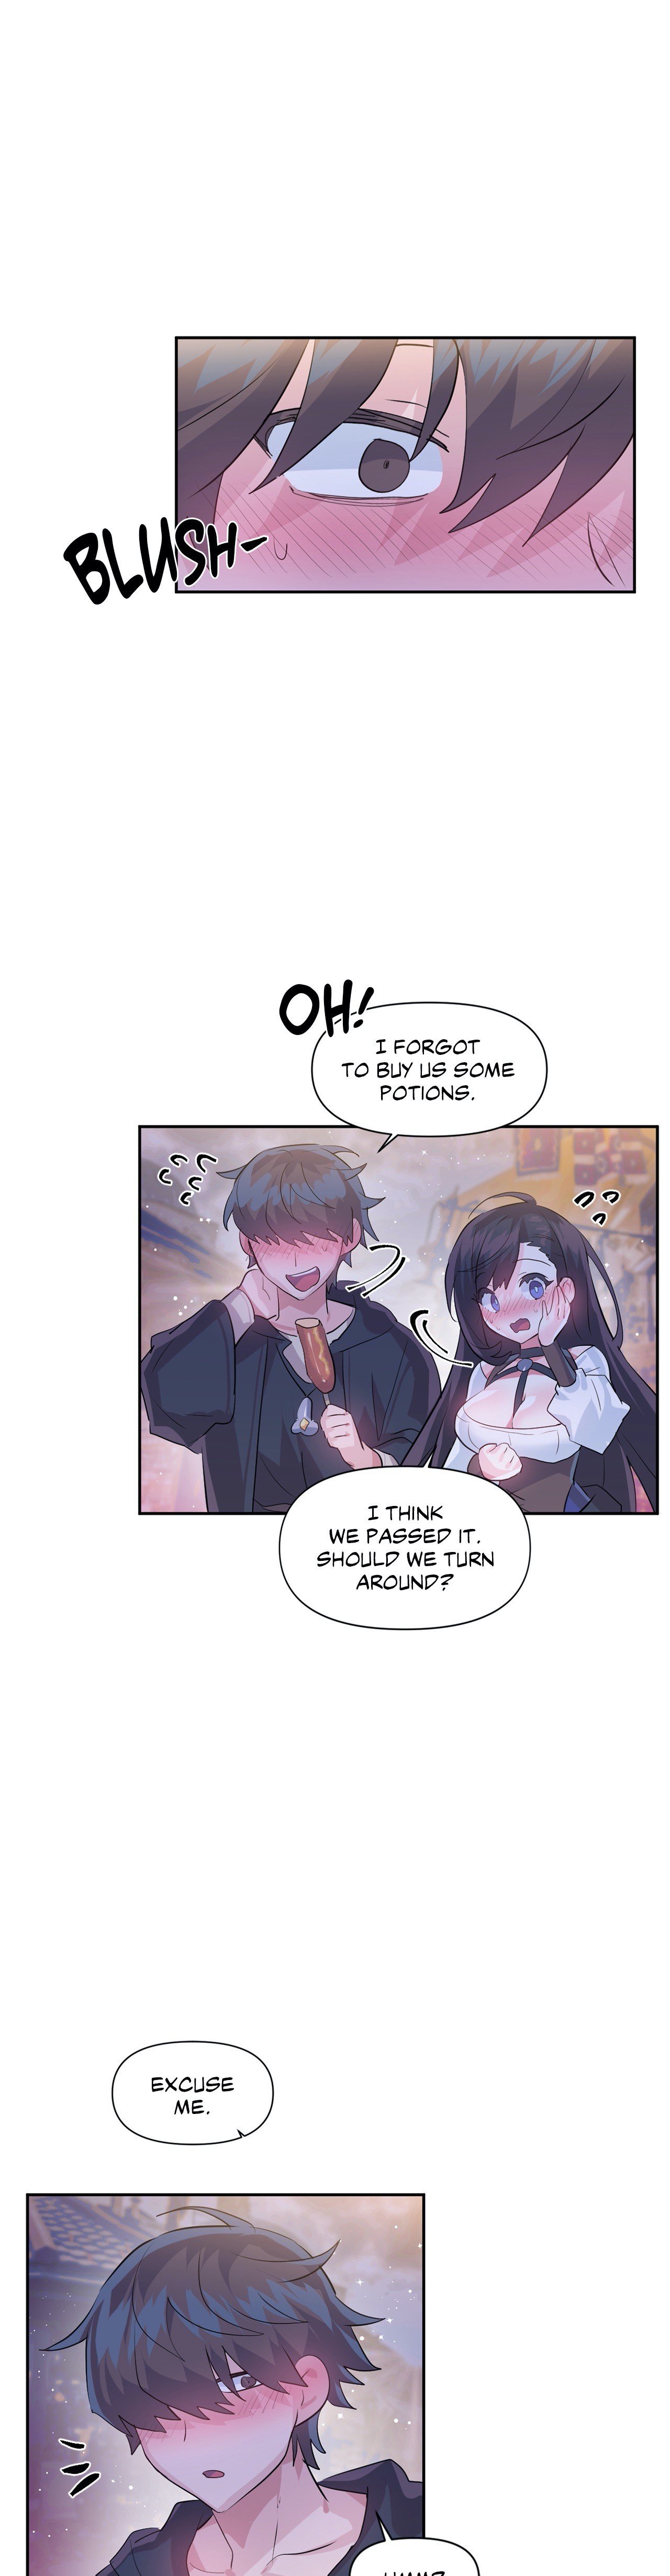 log-in-to-lust-a-land-chap-32-16